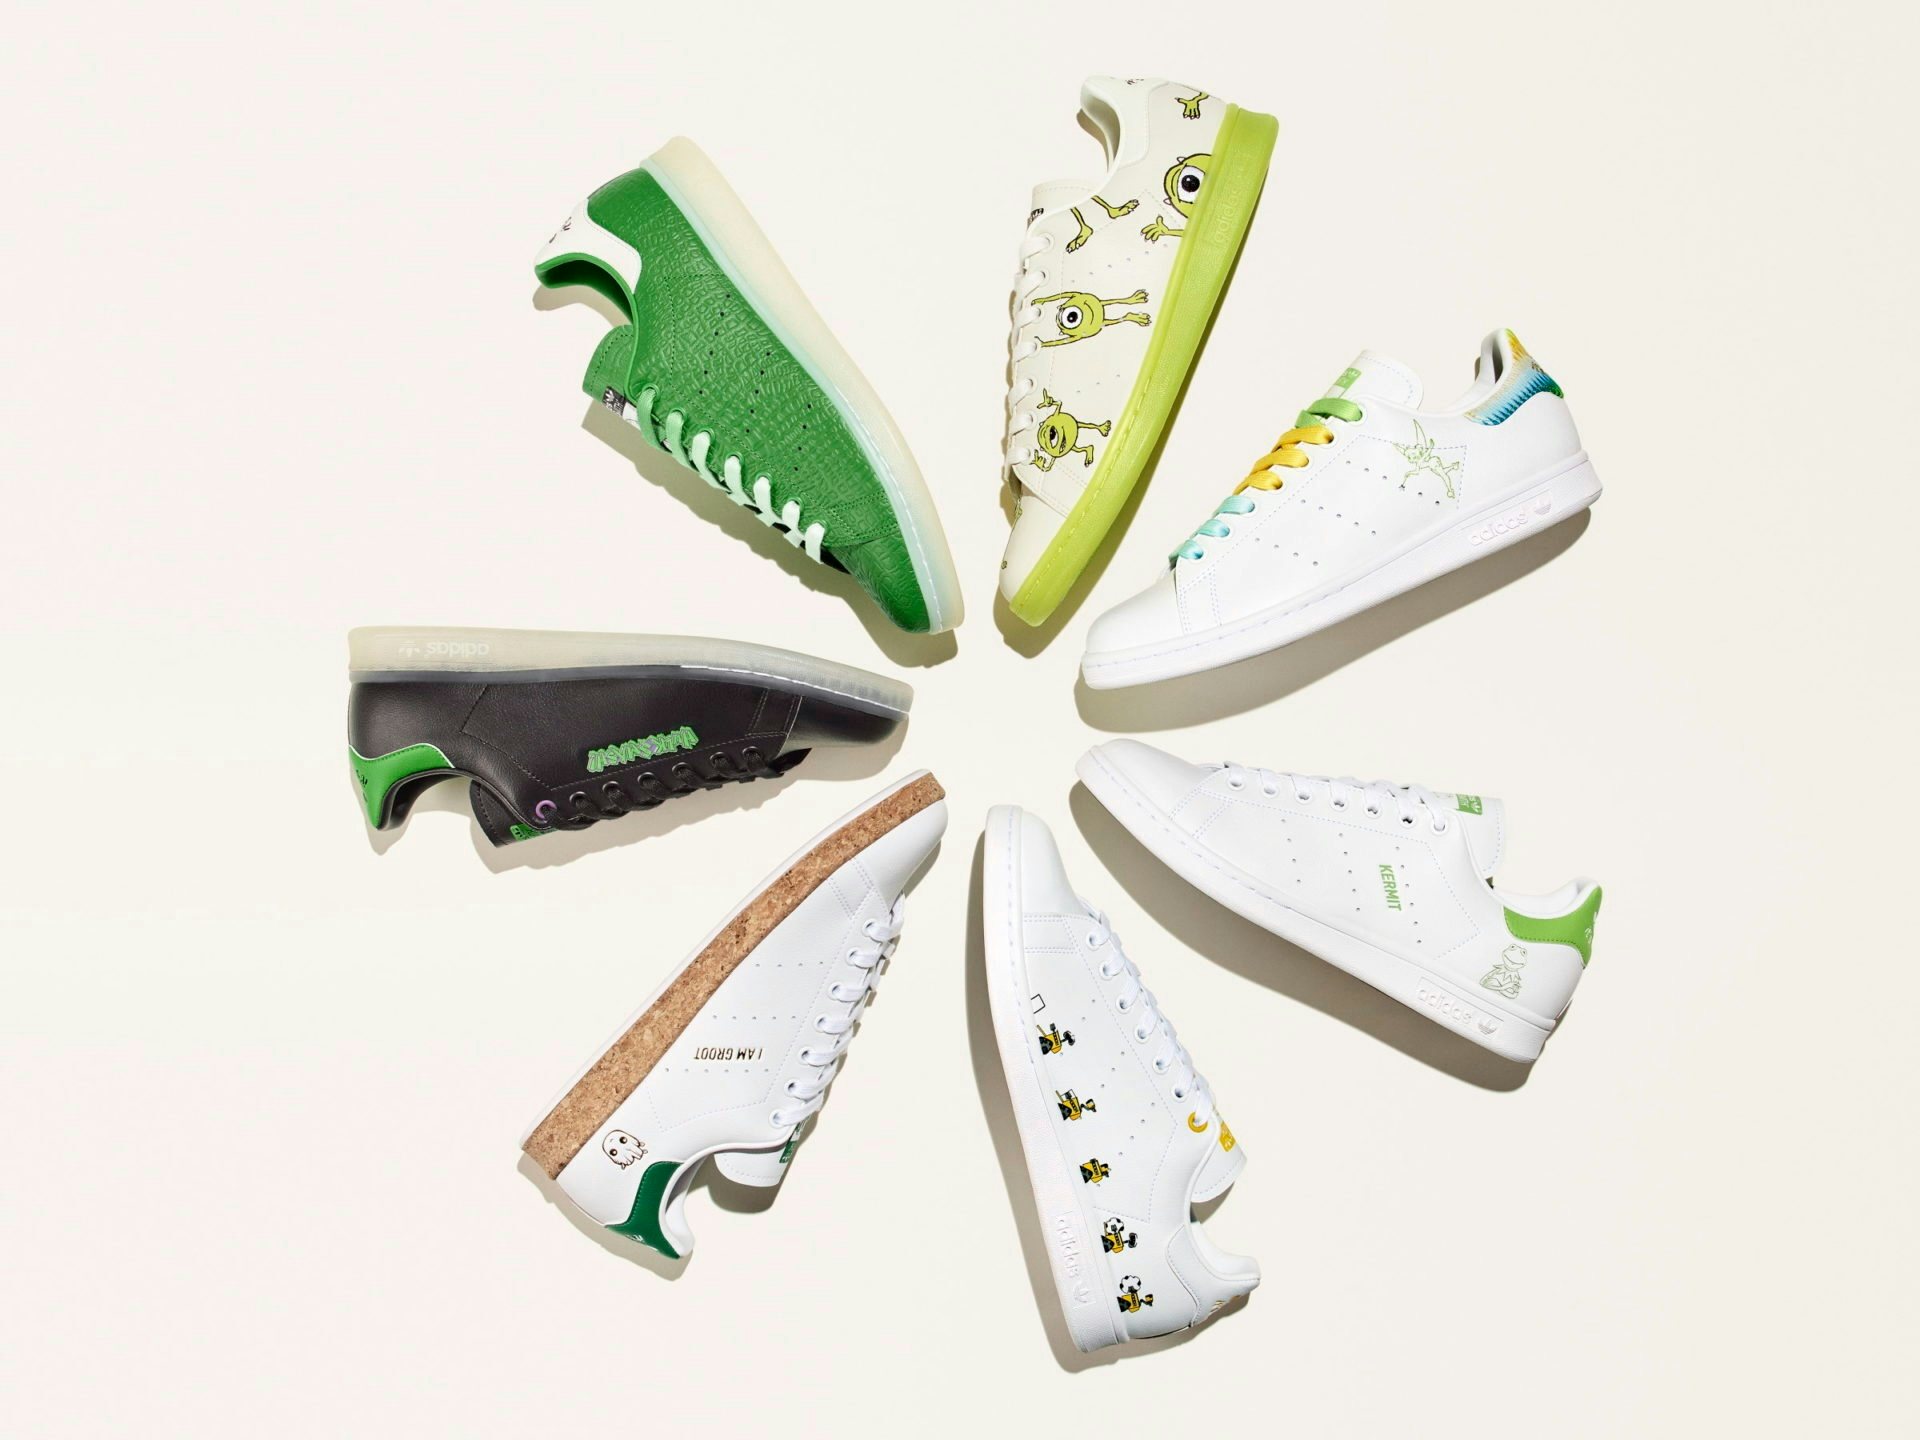 Kermit the Frog is among the Disney characters featured in adidas’s “green” collaboration. Photo: Courtesy of adidas